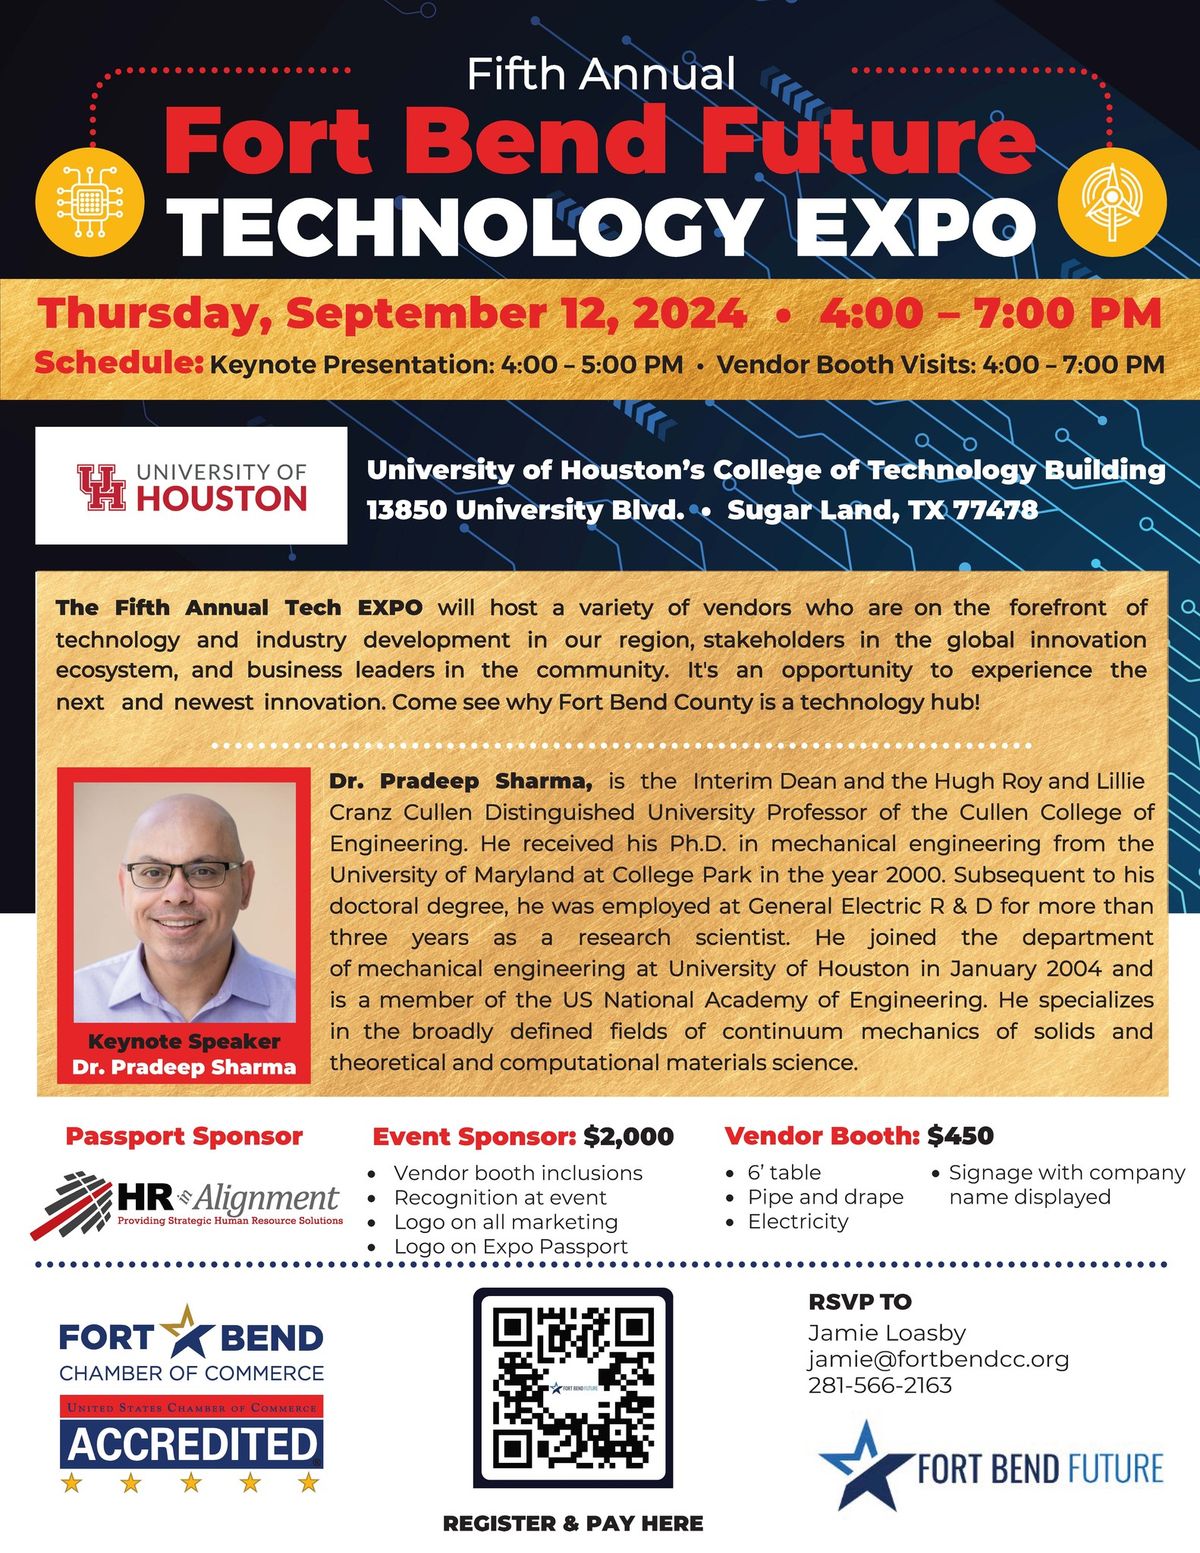 Fifth Annual Fort Bend Future Technology Expo